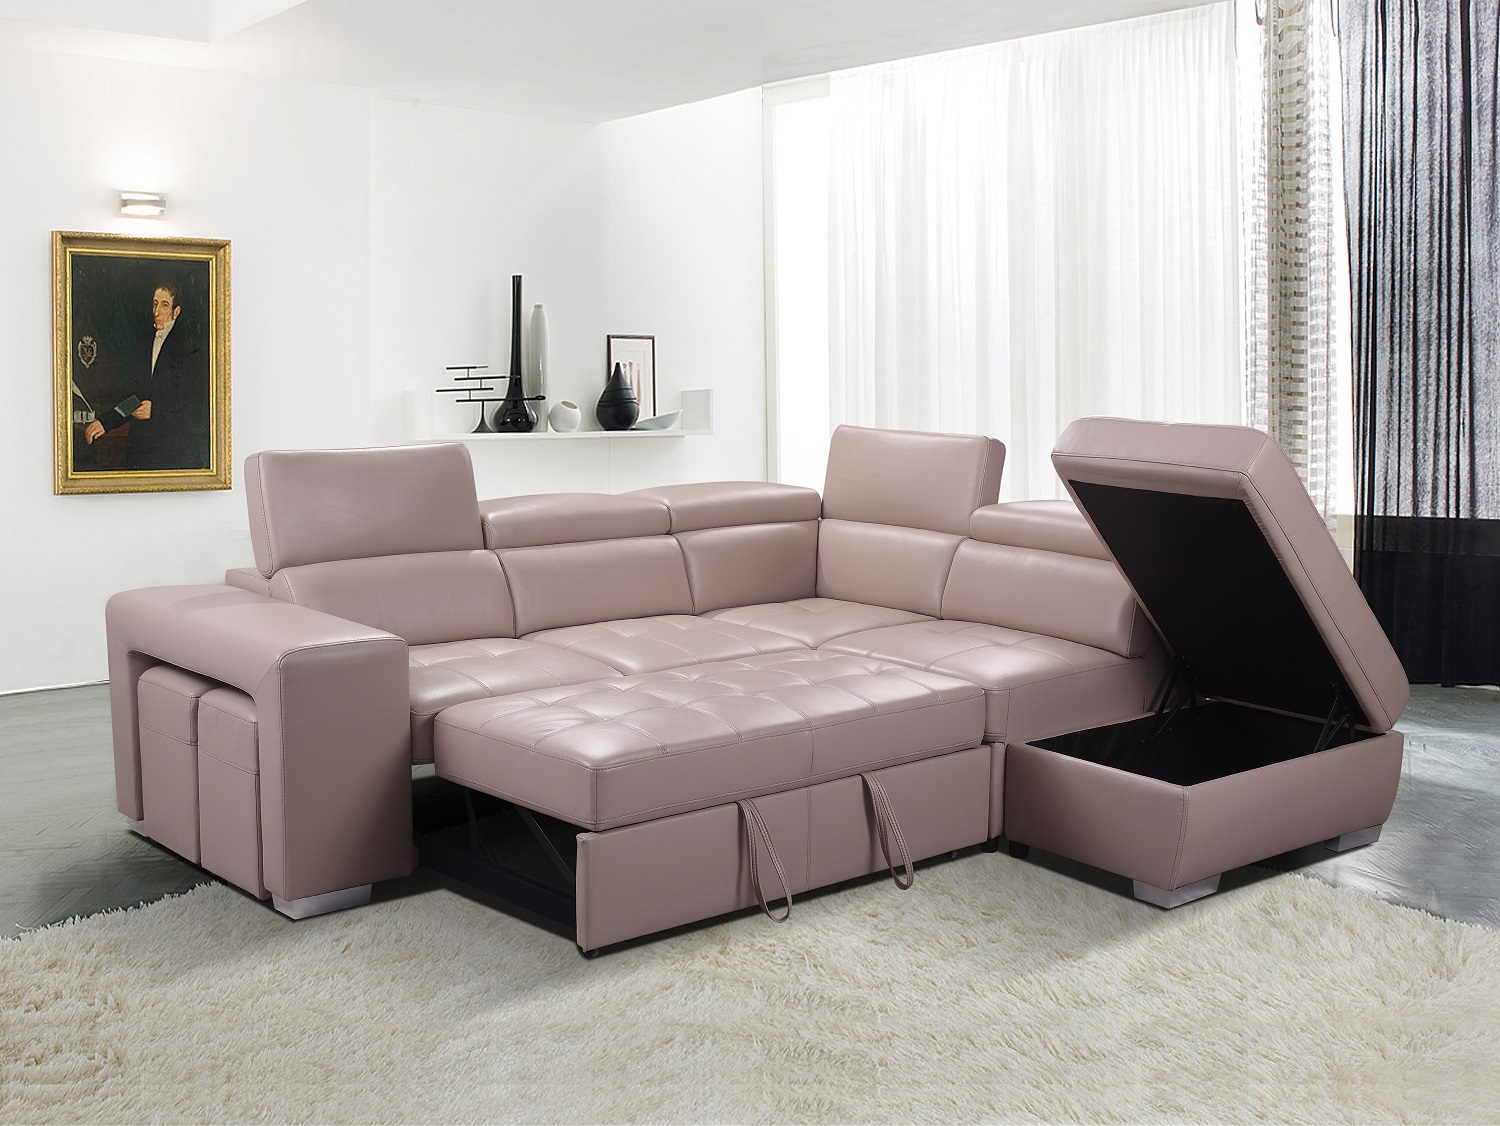 SECTIONAL-GL 6239 POSTIANO